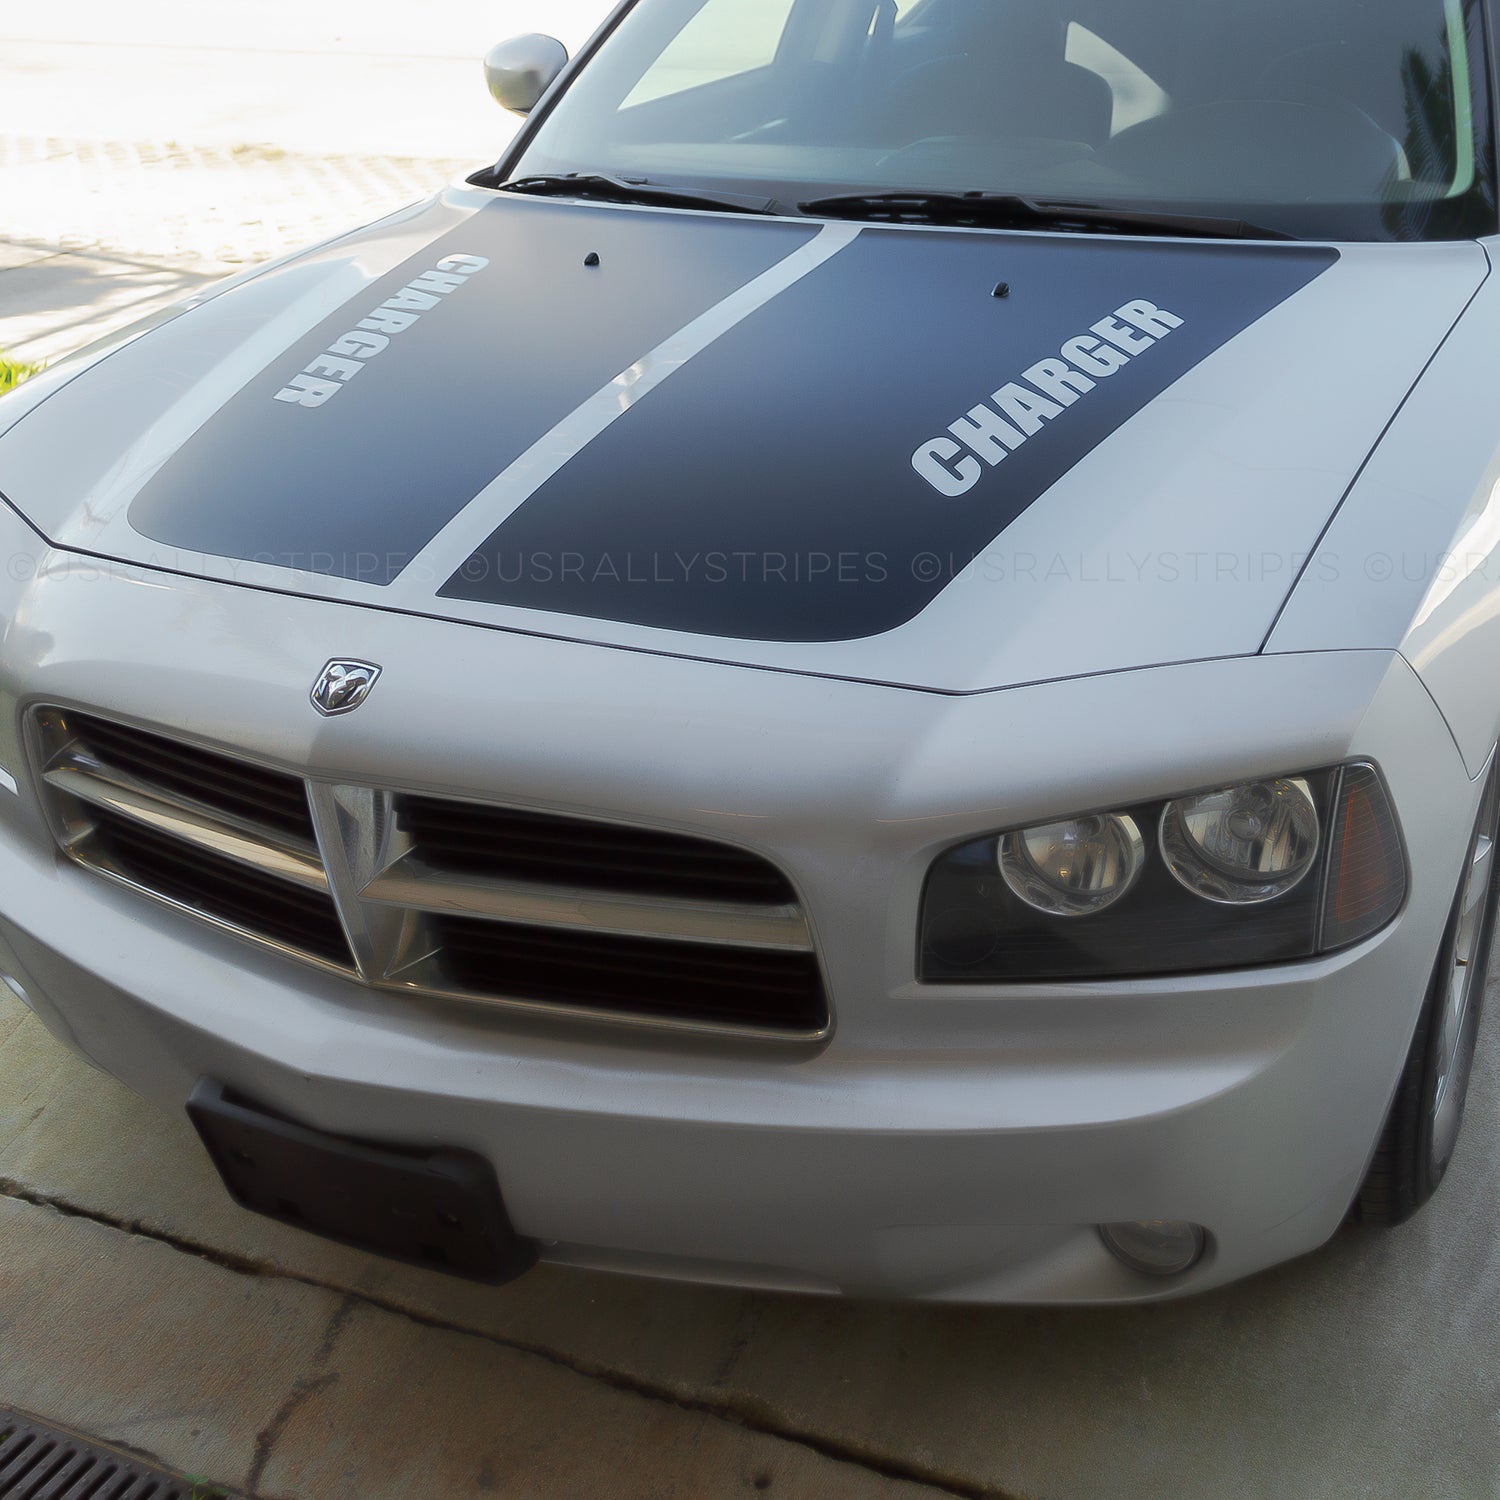 Hood stripes w/ CHARGER cut-out pre-cut decal set fits Dodge 2006-2010 - US Rallystripes